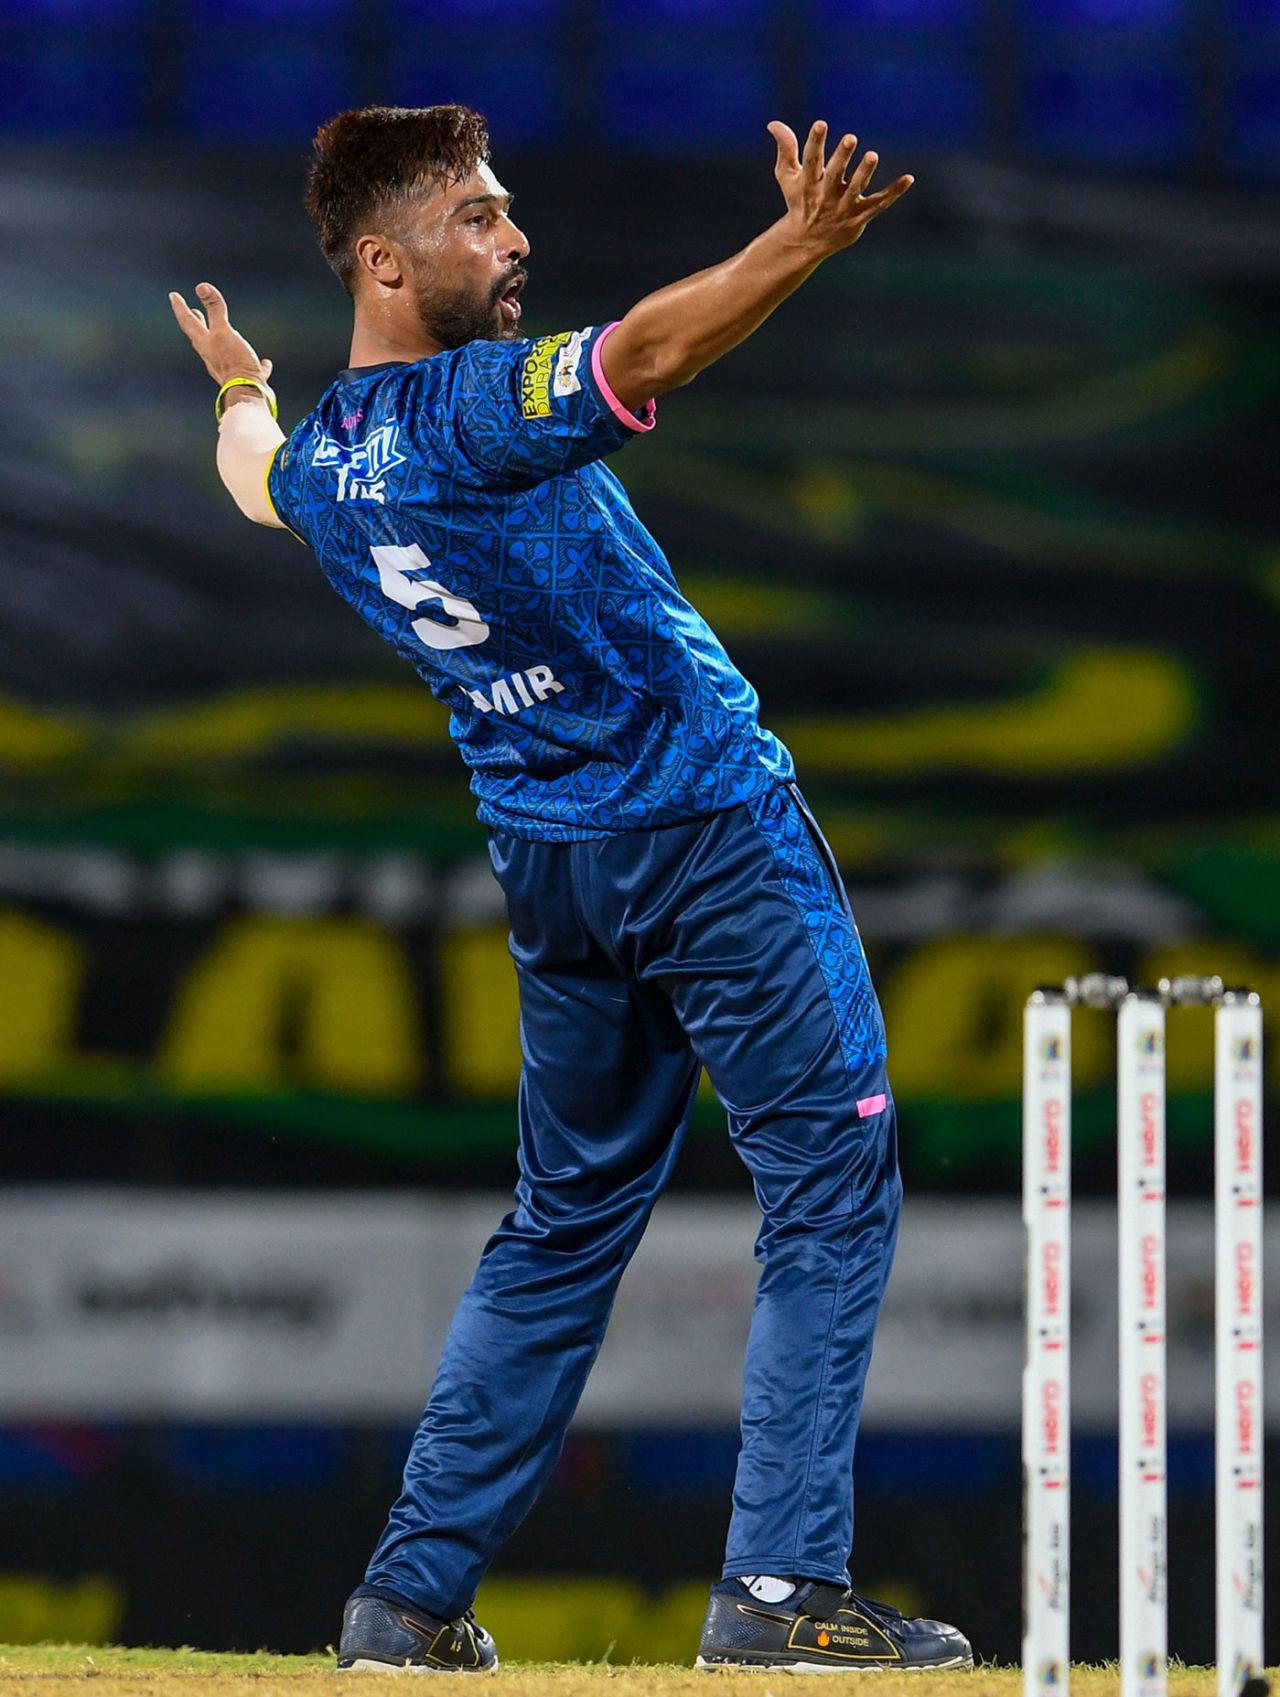 Mohammad Amir gave Royals hope with three wickets, Barbados Royals vs Trinbago Knight Riders, CPL, Basseterre, August 27, 2021